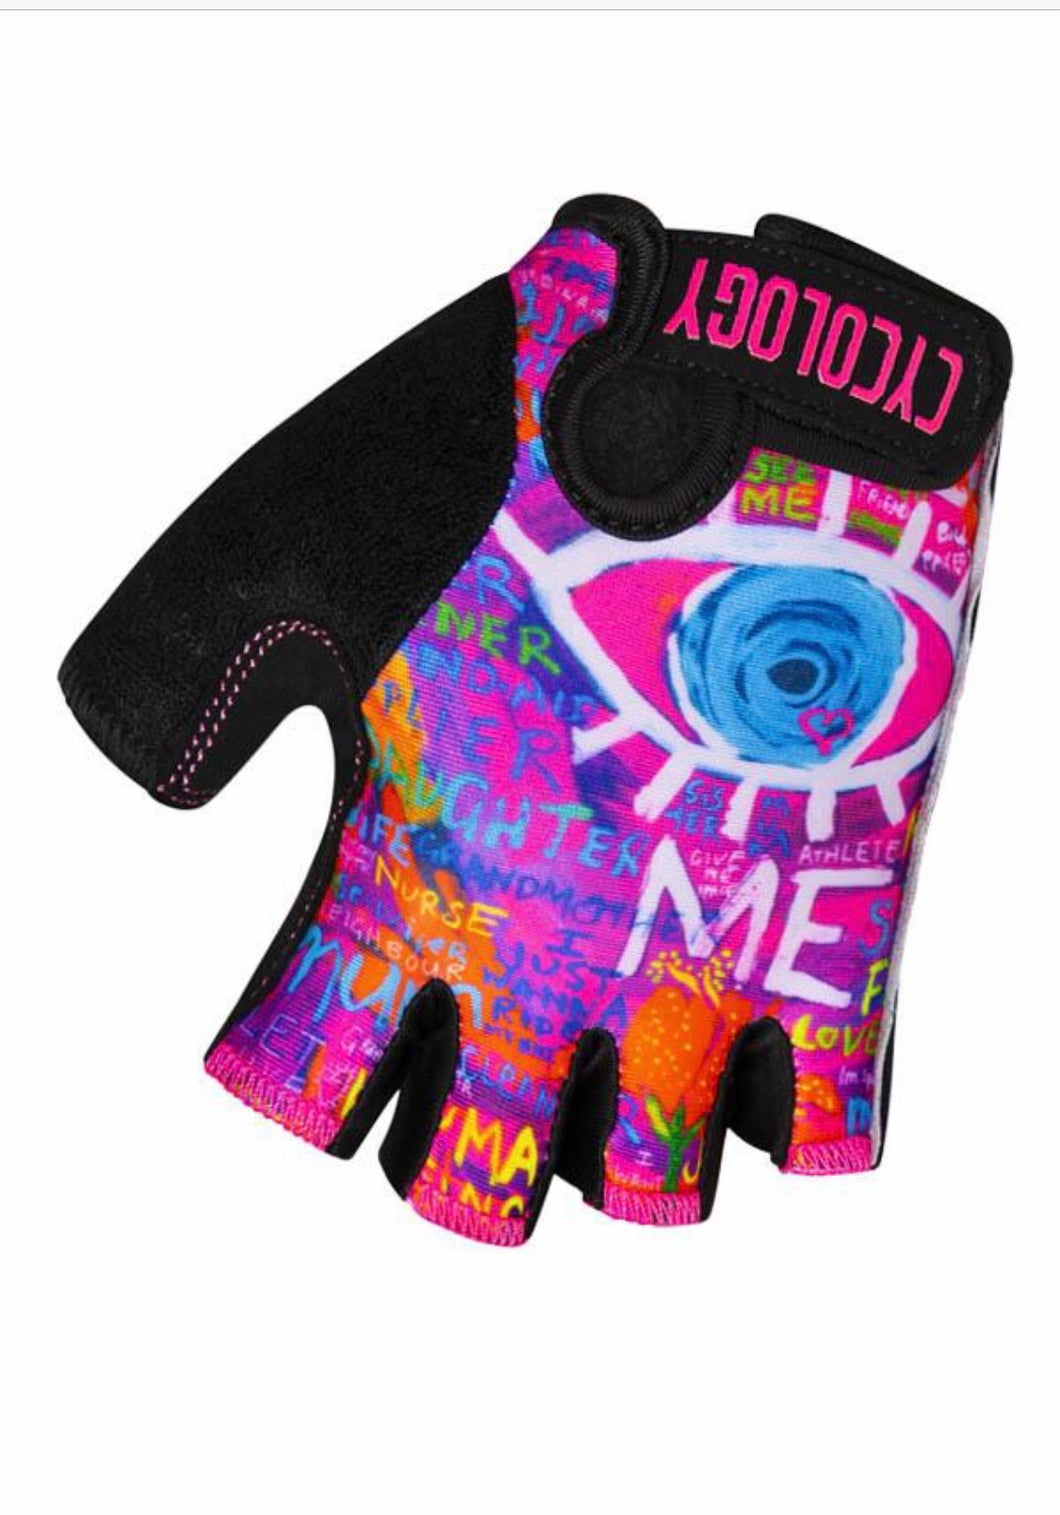 Cycology Quality Unisex Short-Fingered Cycling Gloves - Design See Me